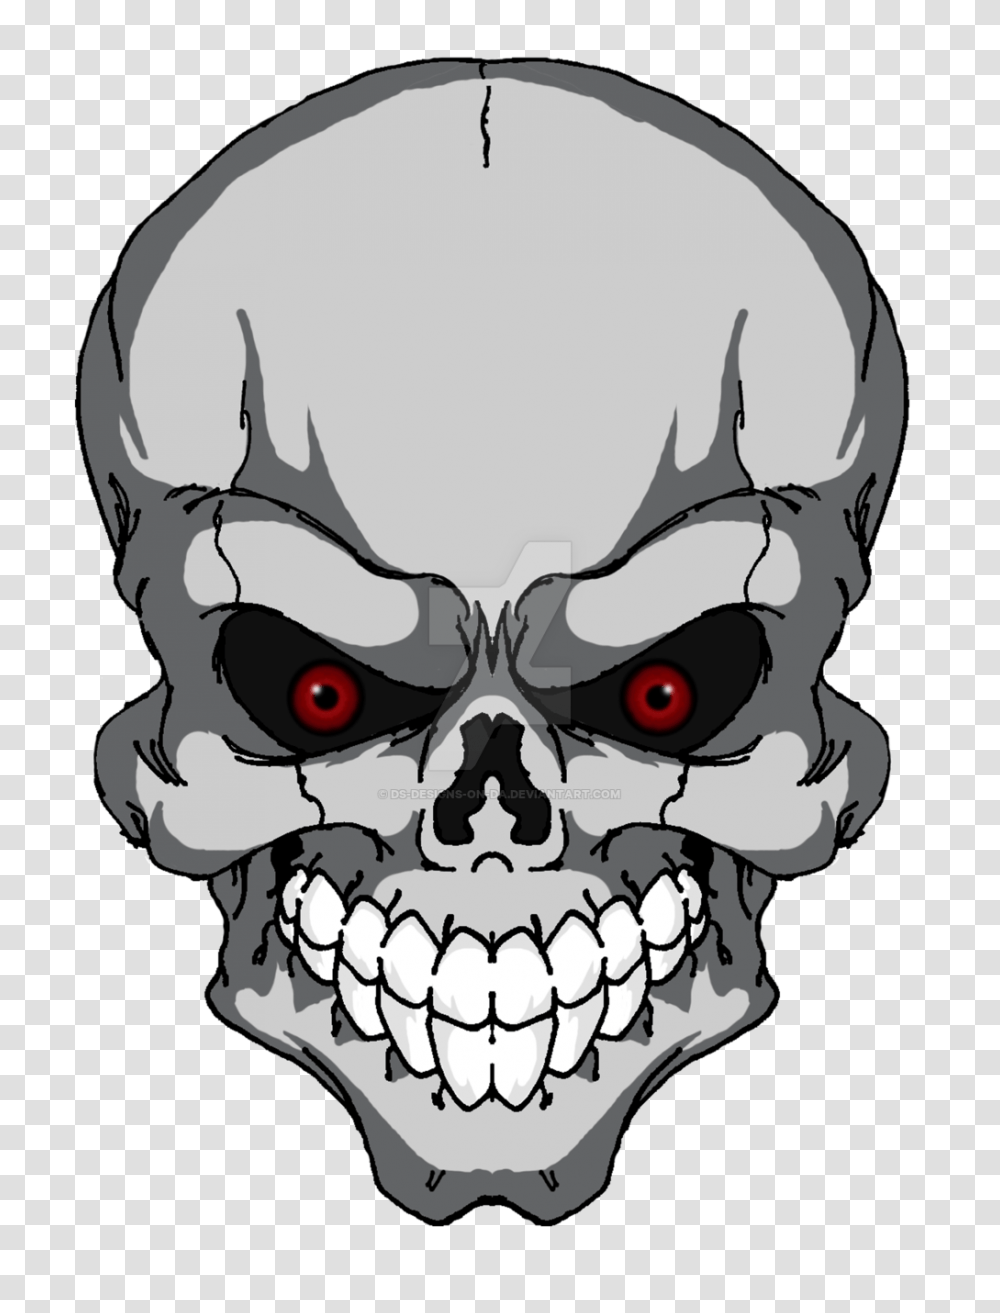 Skull Designs Group With Items, Jaw, Stencil, Head, Mask Transparent Png